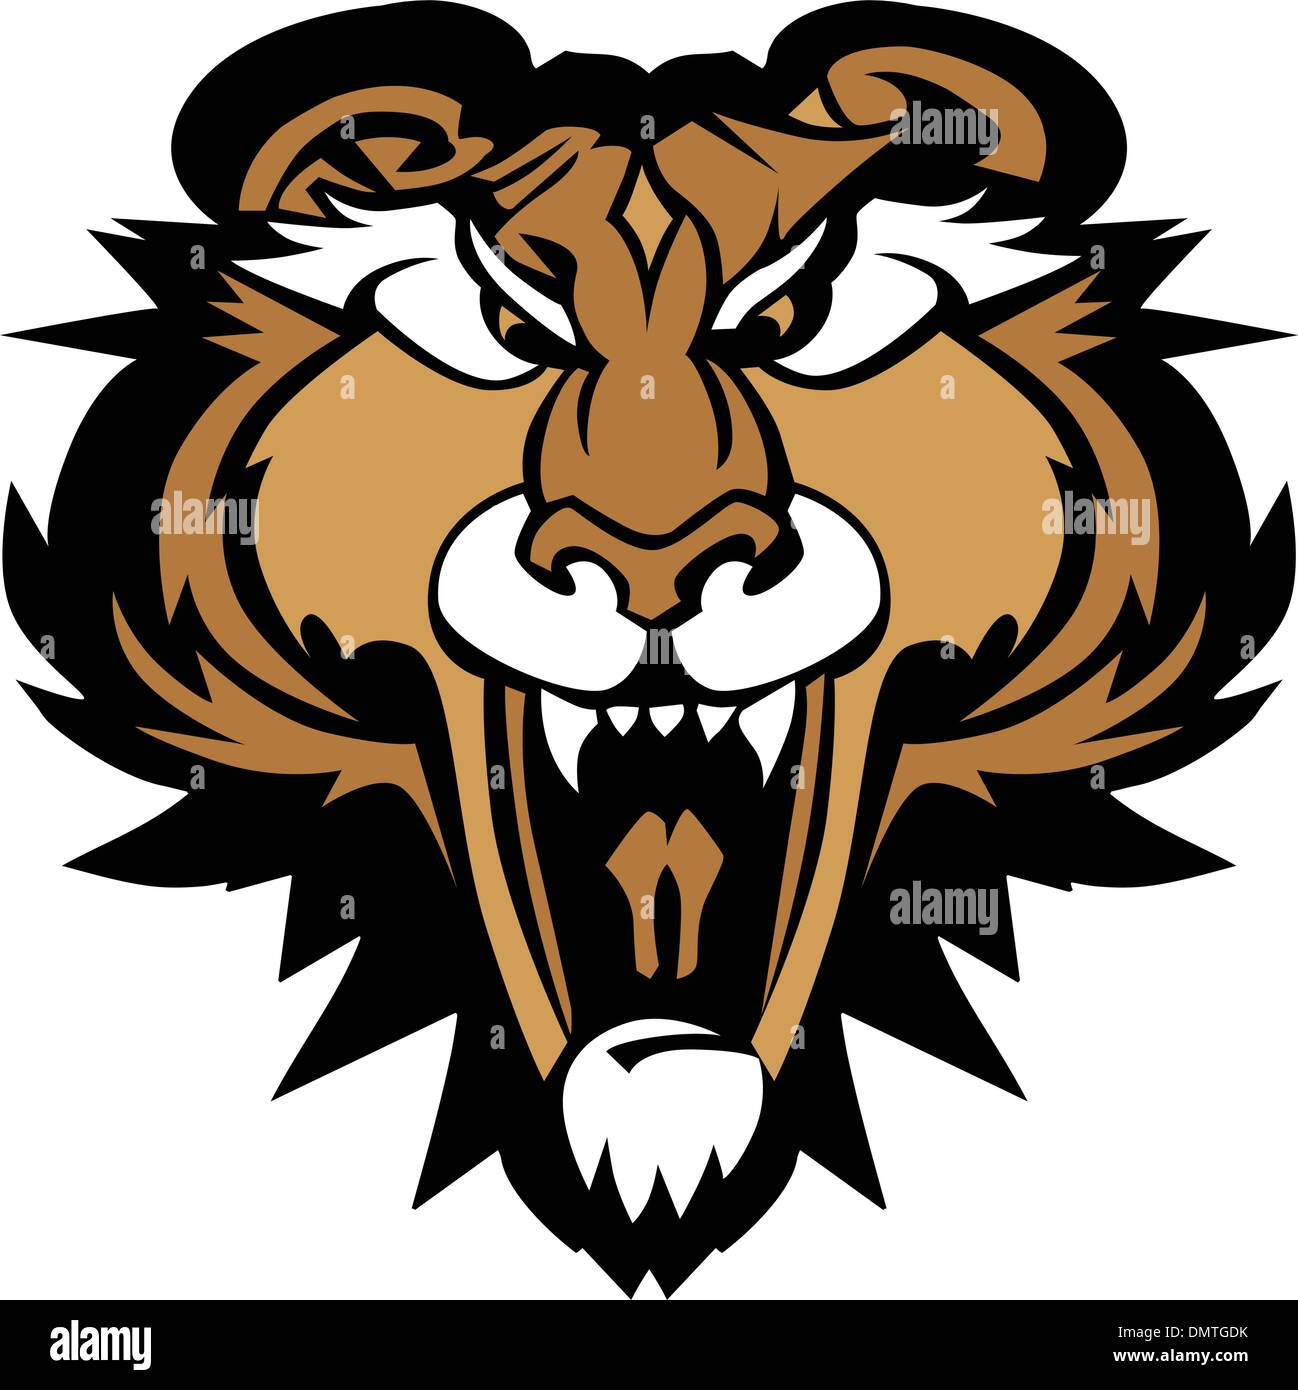 Cougar Panther Mascot Head Vector Graphic Stock Vector